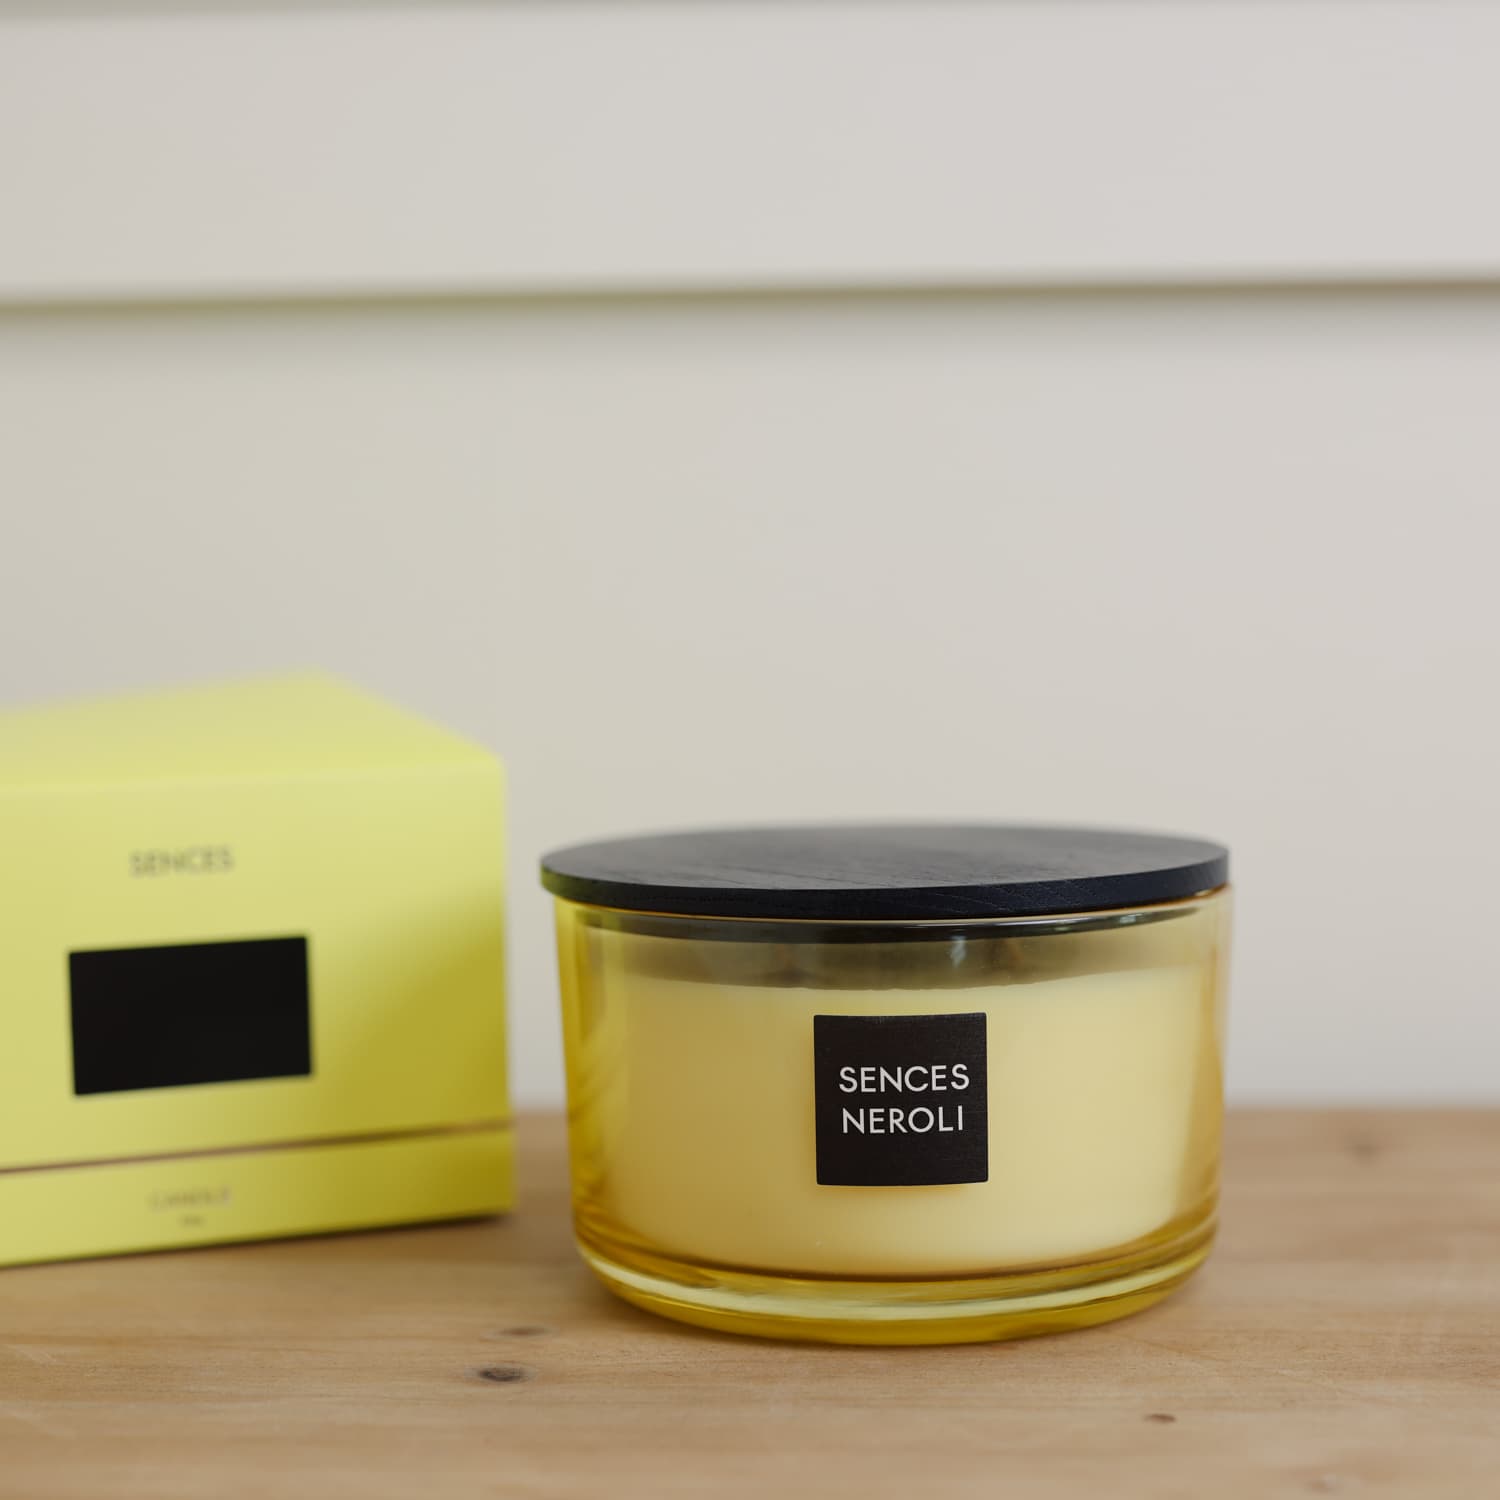 Sences Neroli Lidded Candle with lid on and presentation box in background.